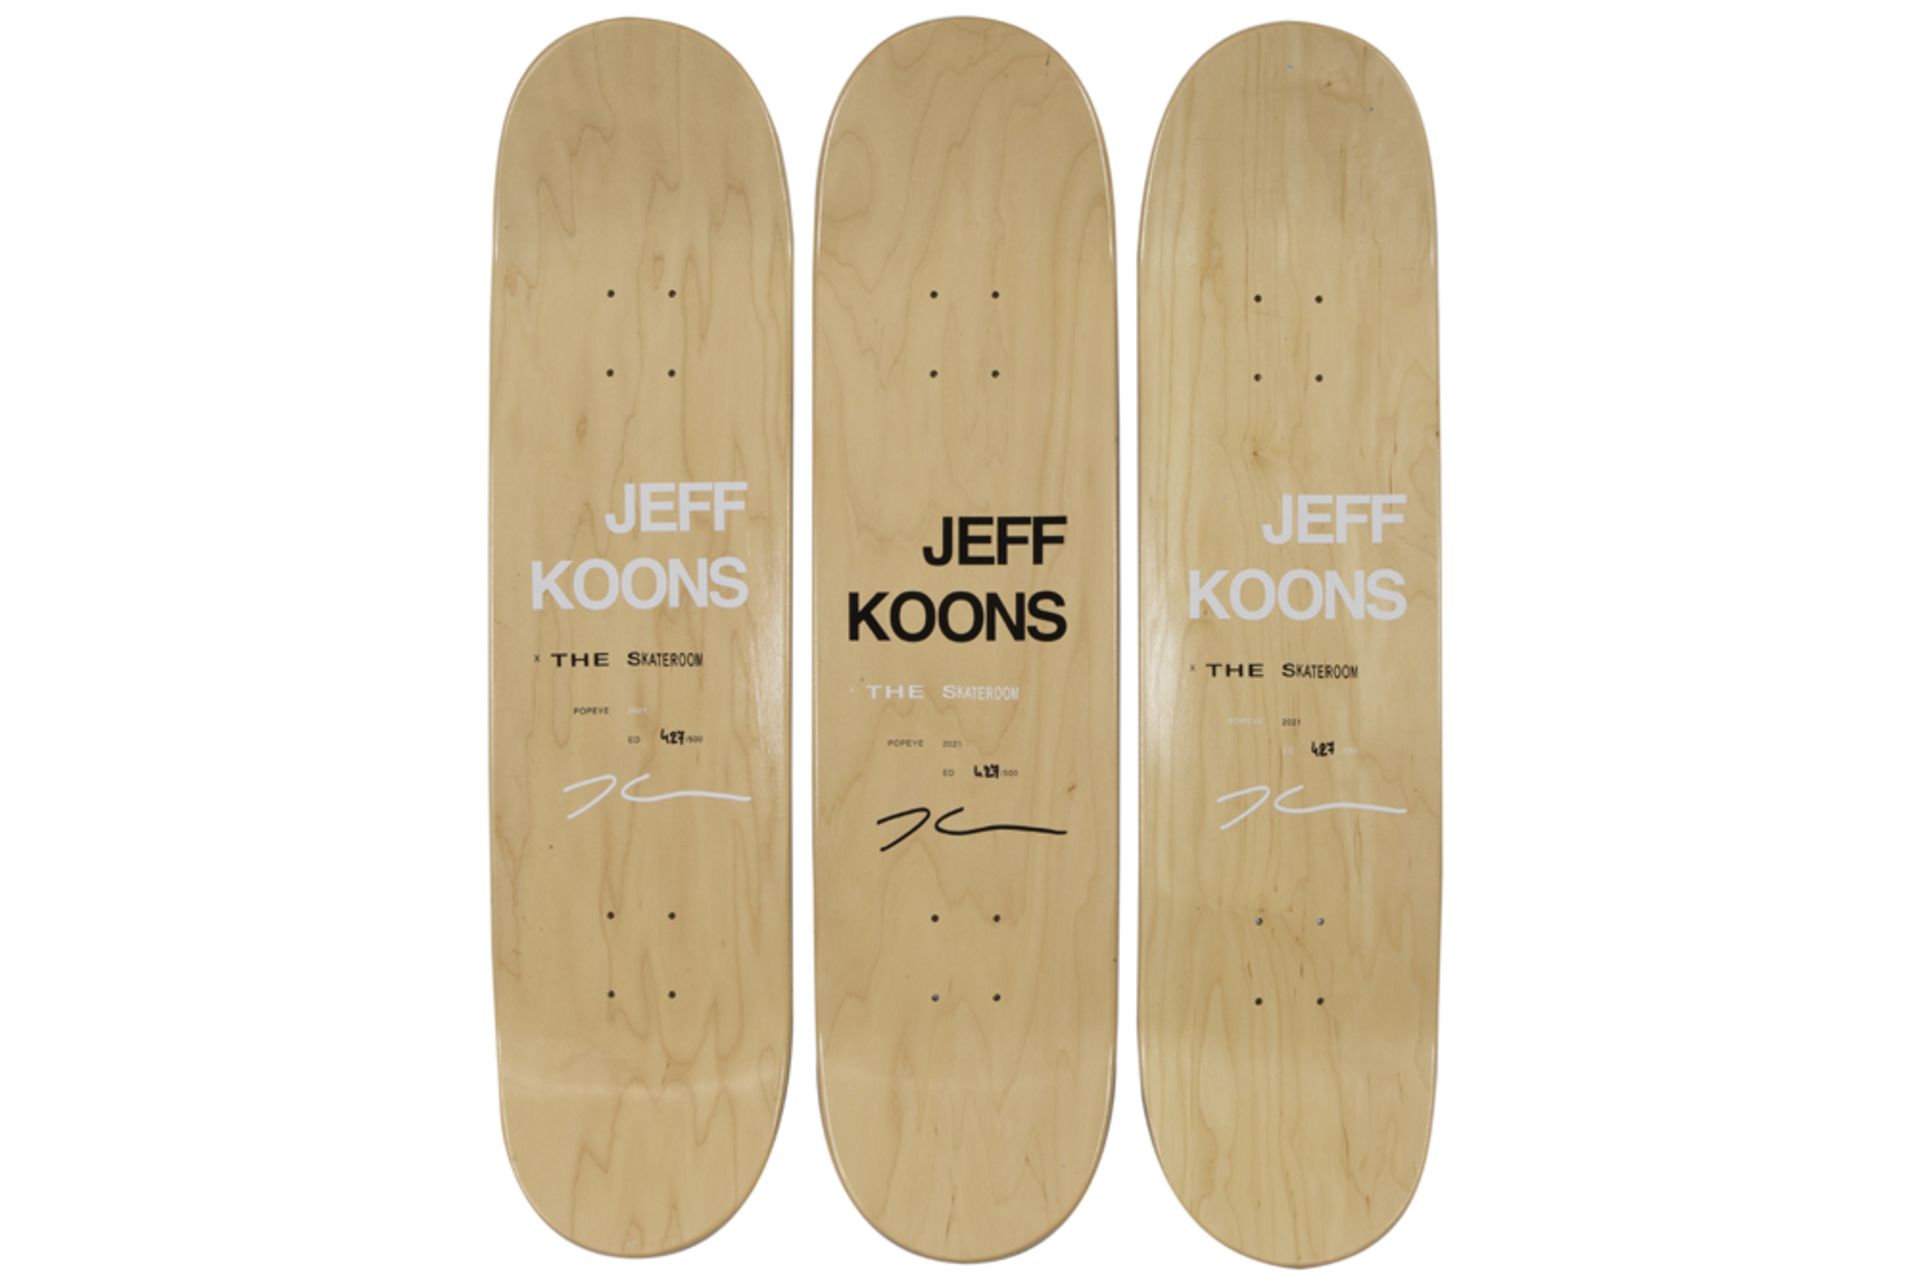 Jeff Koons plate signed "Popeye" triptych on skateboards dd 2021, an edition of 500 ex. with - Image 2 of 8